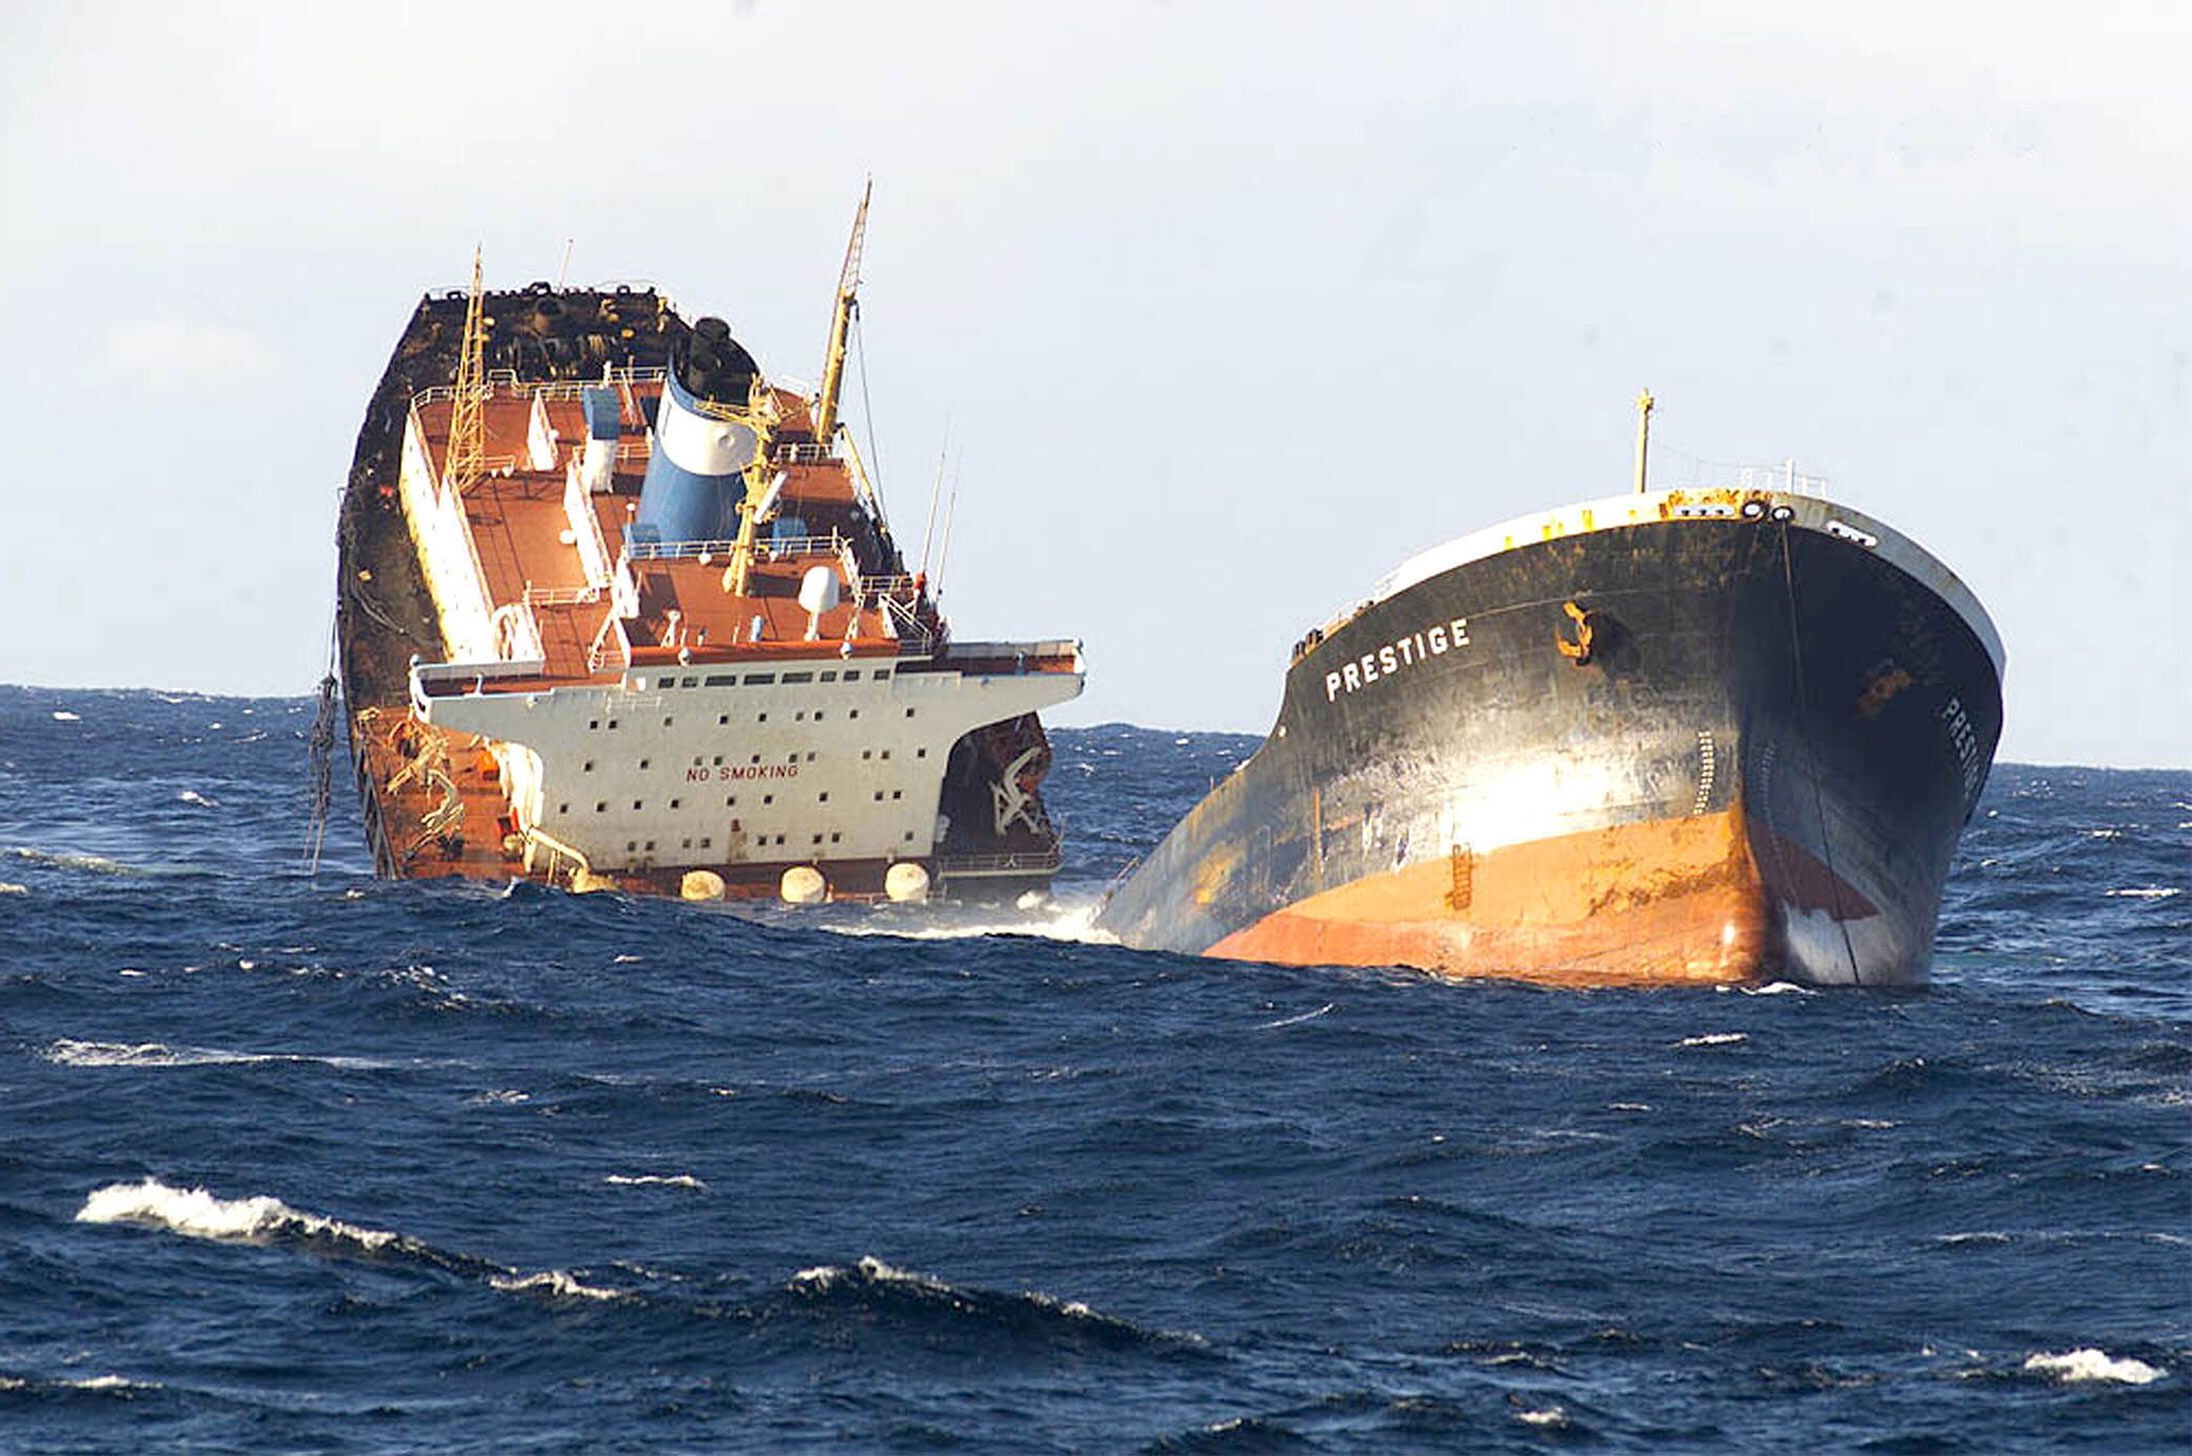 Oil tanker accident the oil tanker prestige sinks off the northwest coast of spain in november 2002. photographer douanes francaises getty images